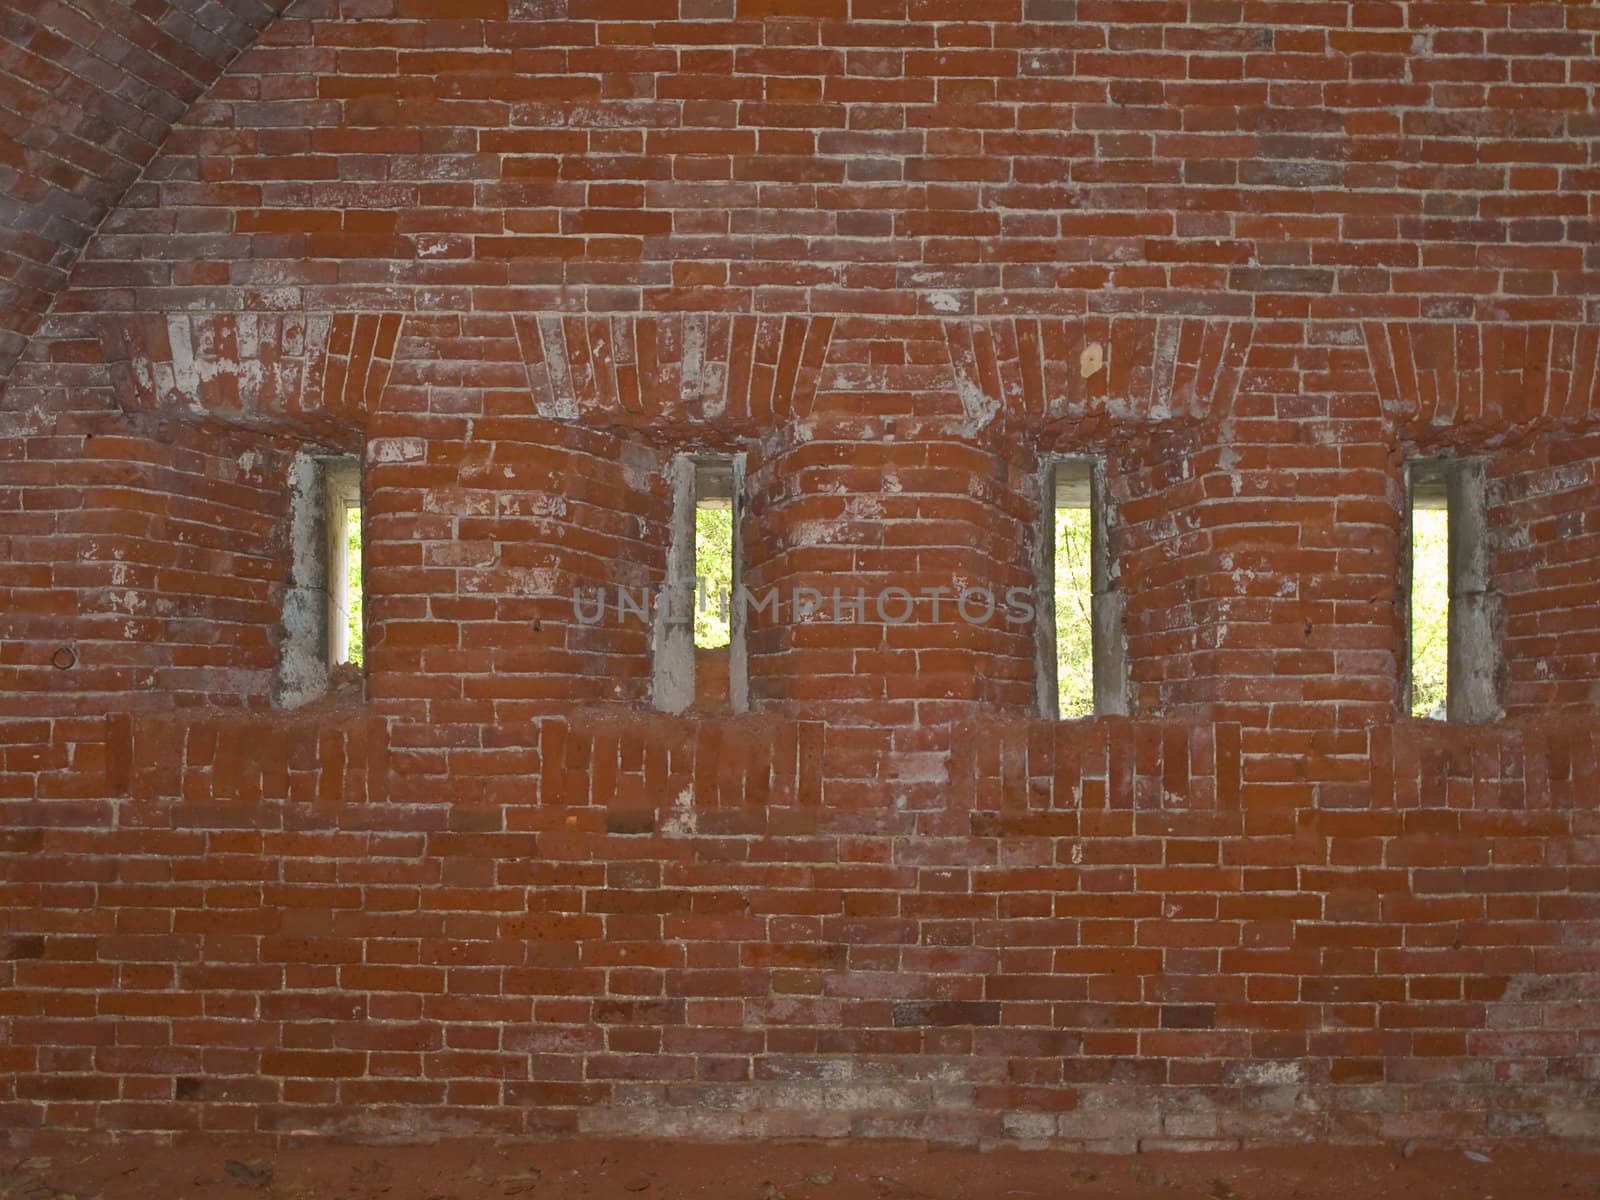 row of narrow loopholes in the red brick wall